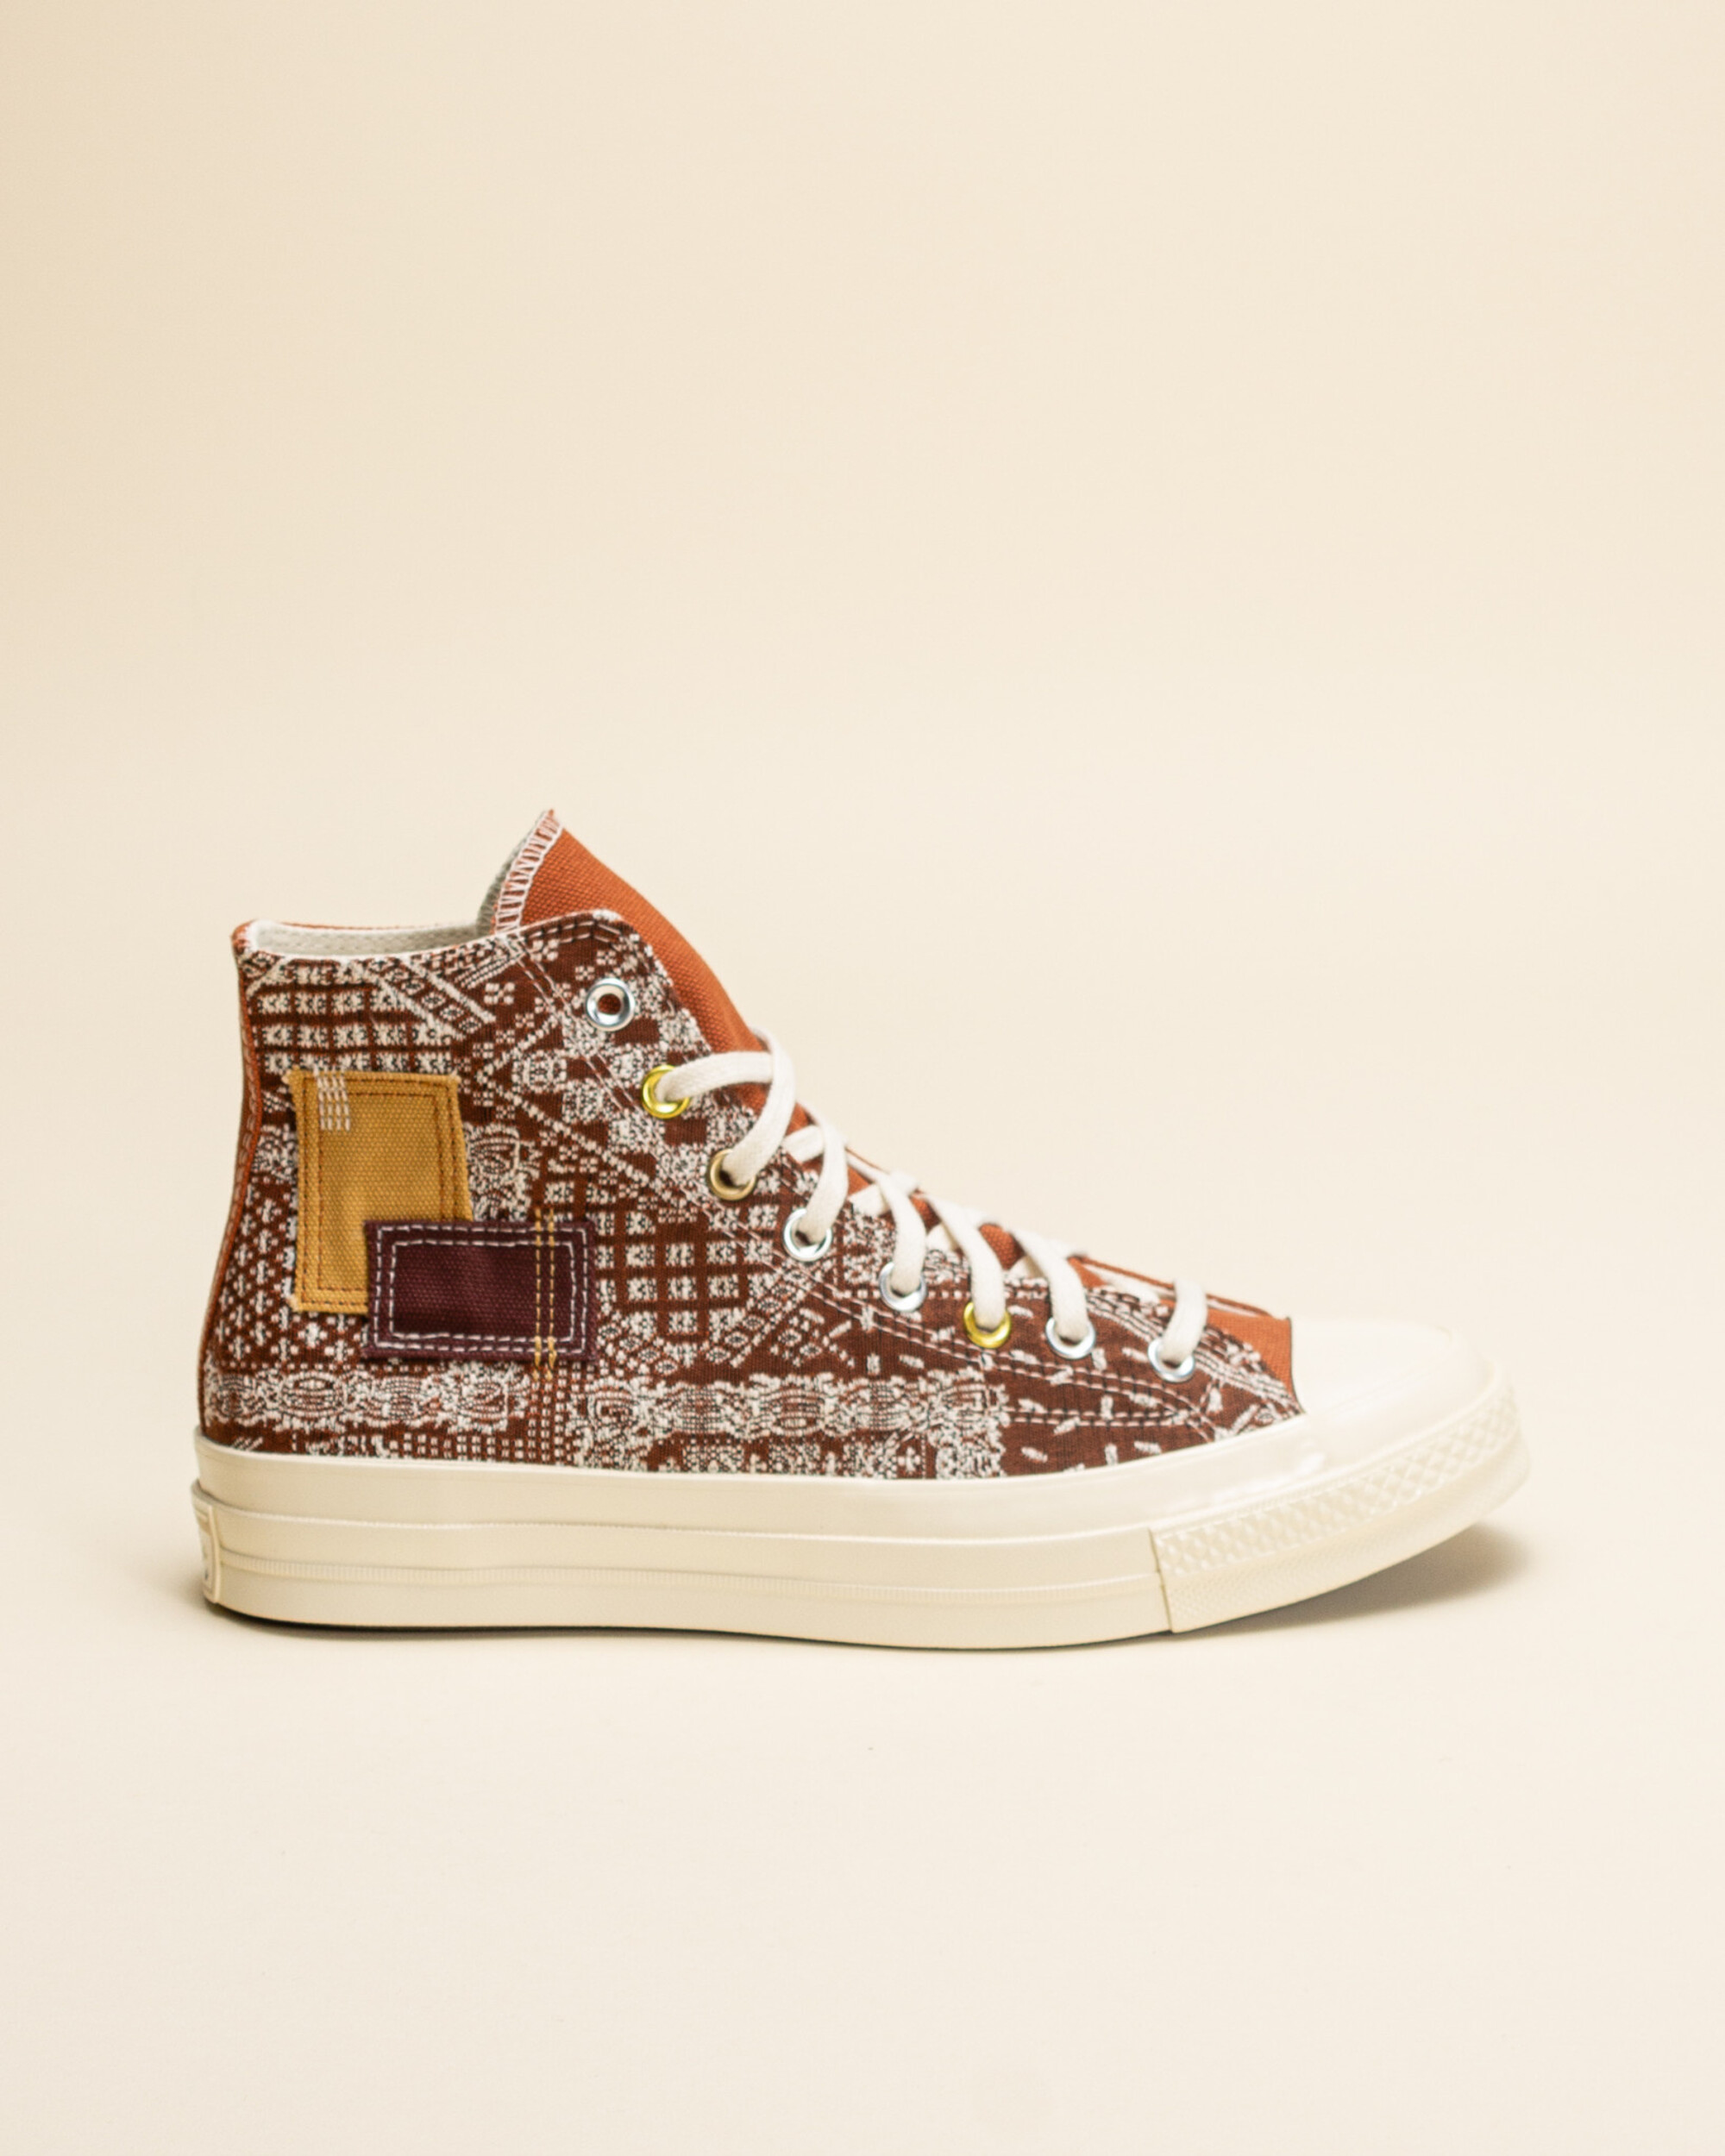 Converse Chuck 70 Patchwork - Tawny owl/Egret/Eternal Earth Brown